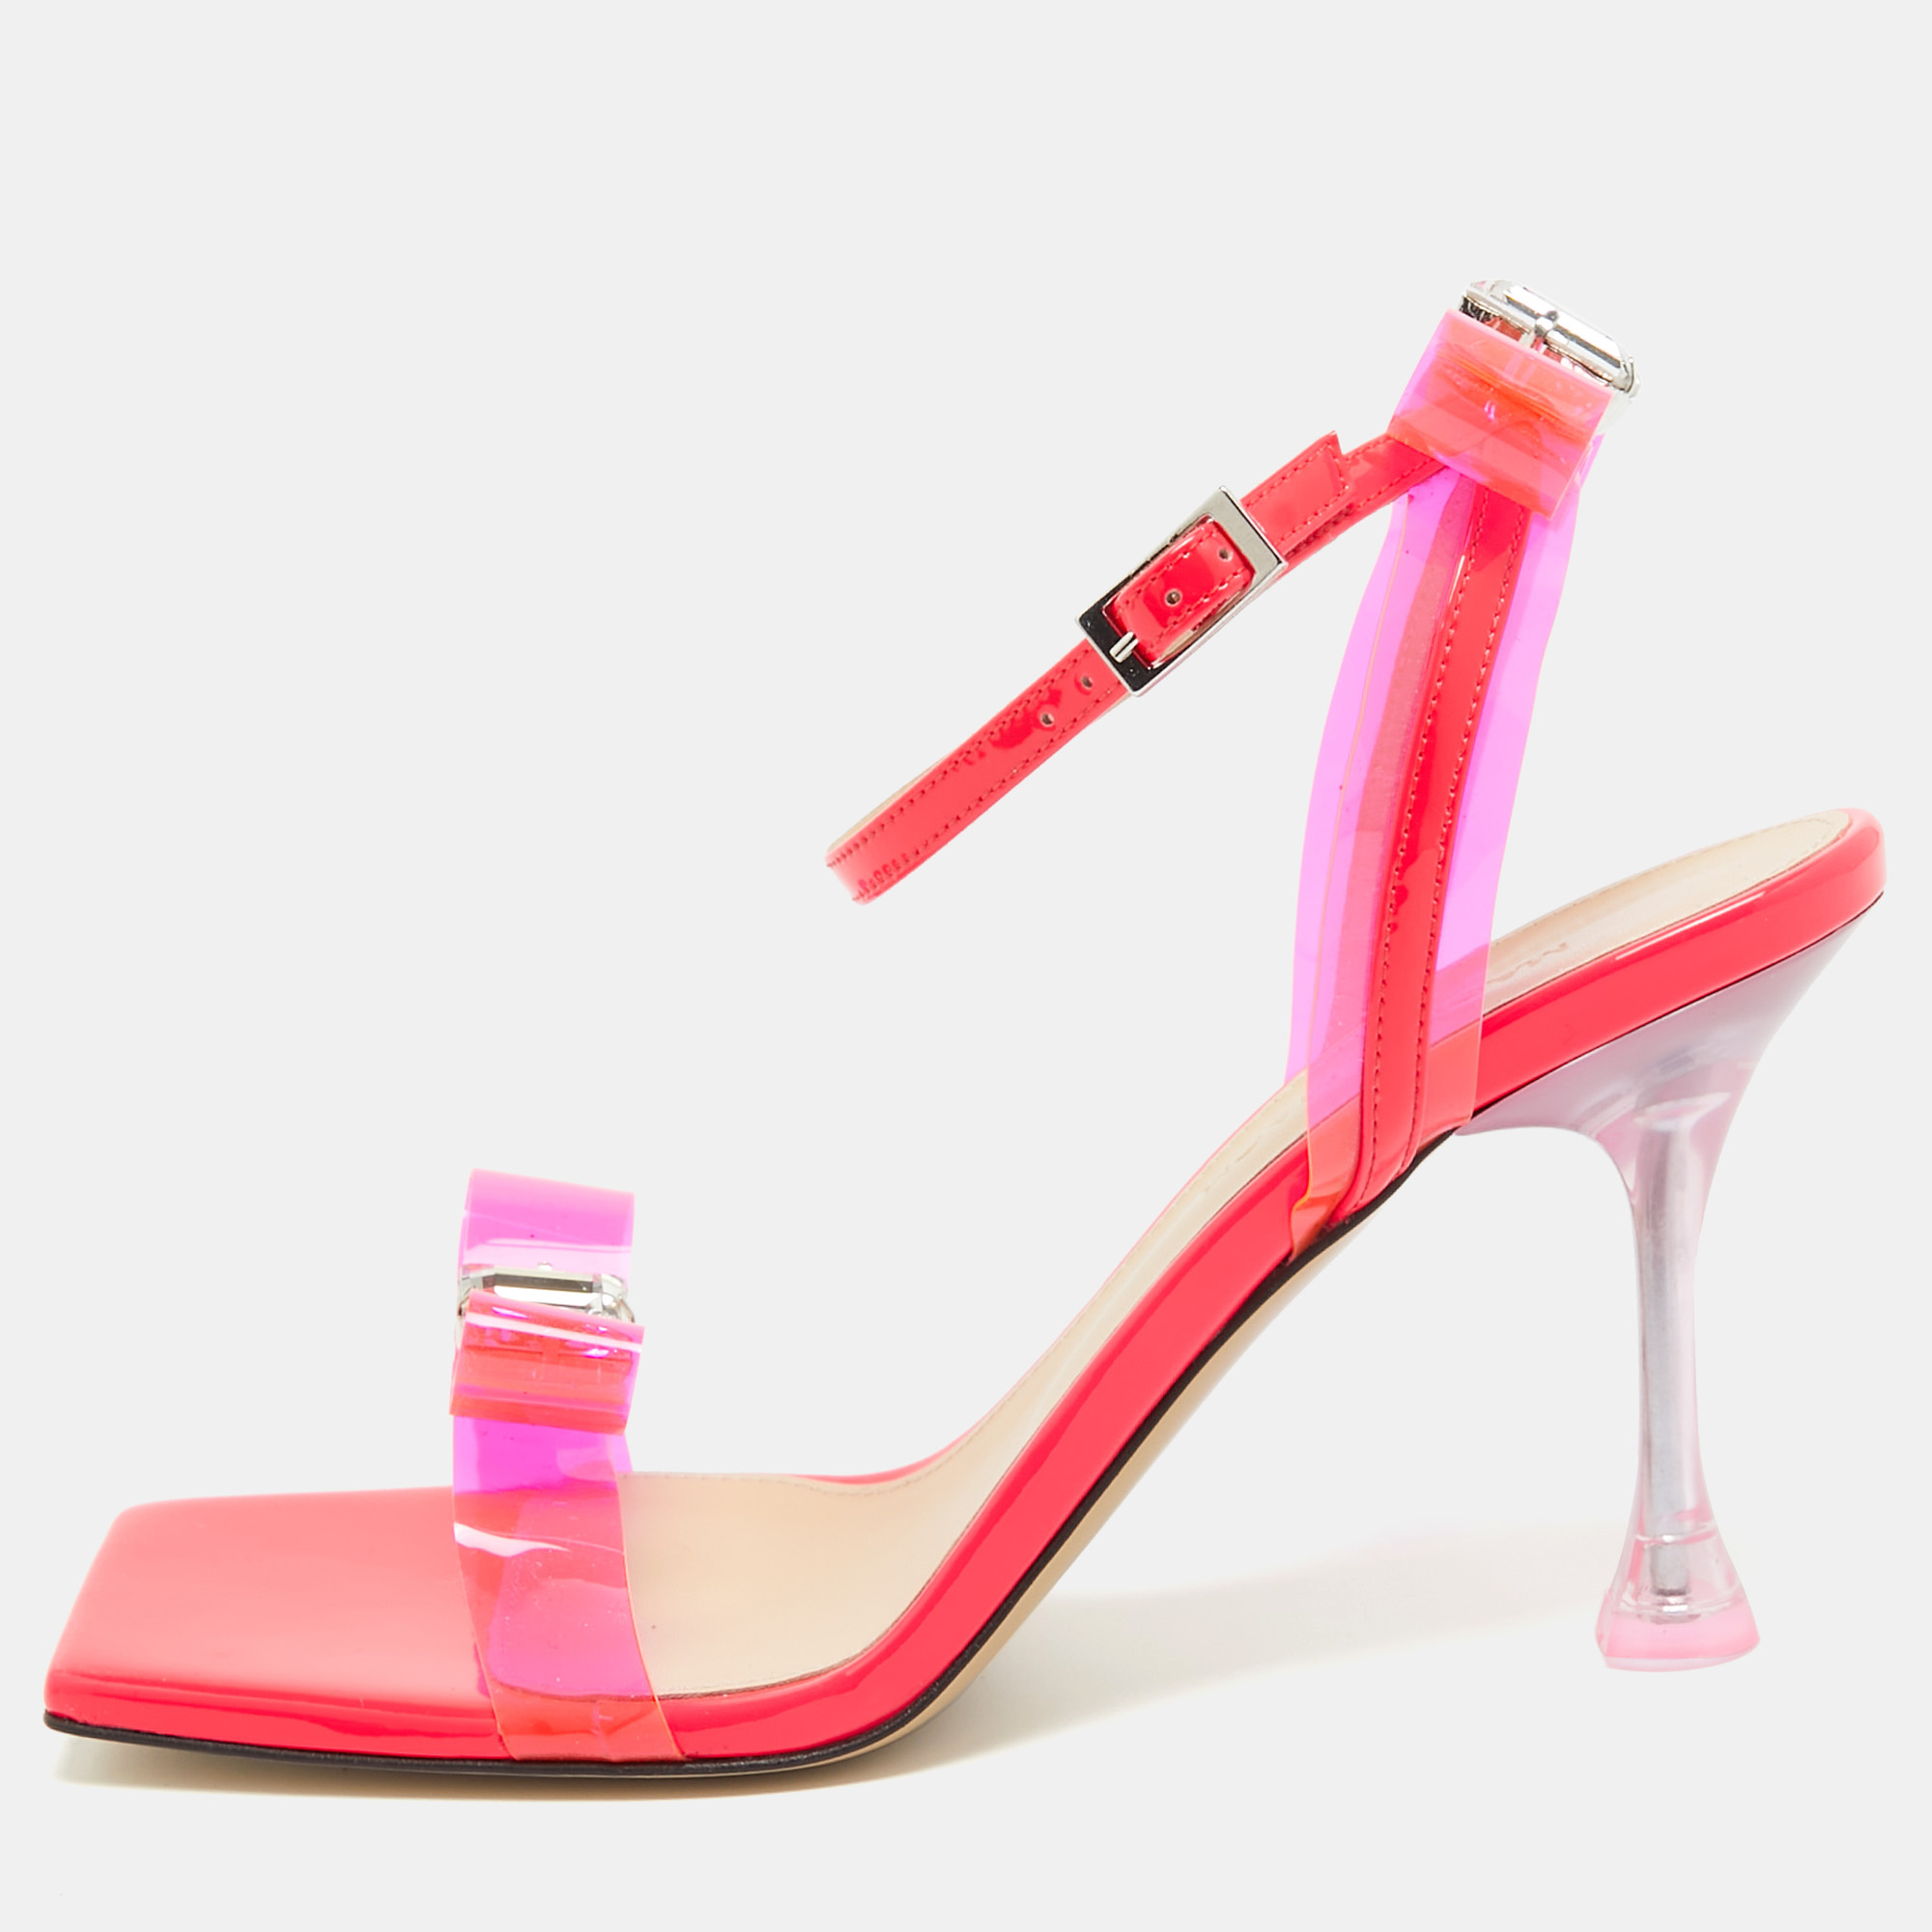 Mach & mach neon pink pvc and patent leather french bow square sandals size 38.5